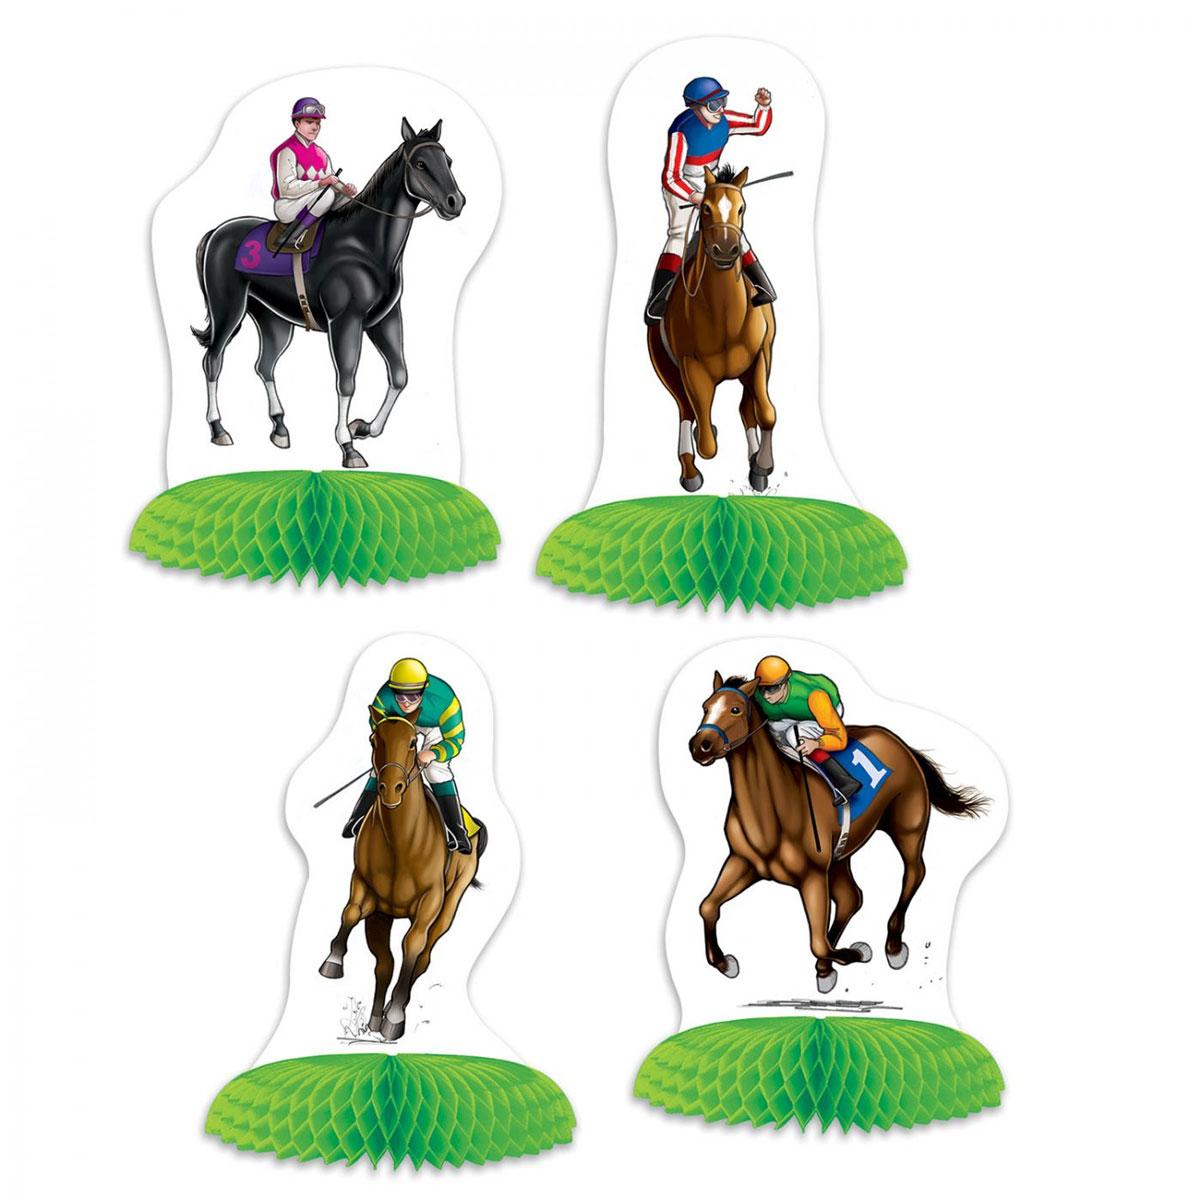 Horse Racing Mini Centerpieces pk4 individual pieces by Beistle 53427 available here at Karnival Costumes onine party shop